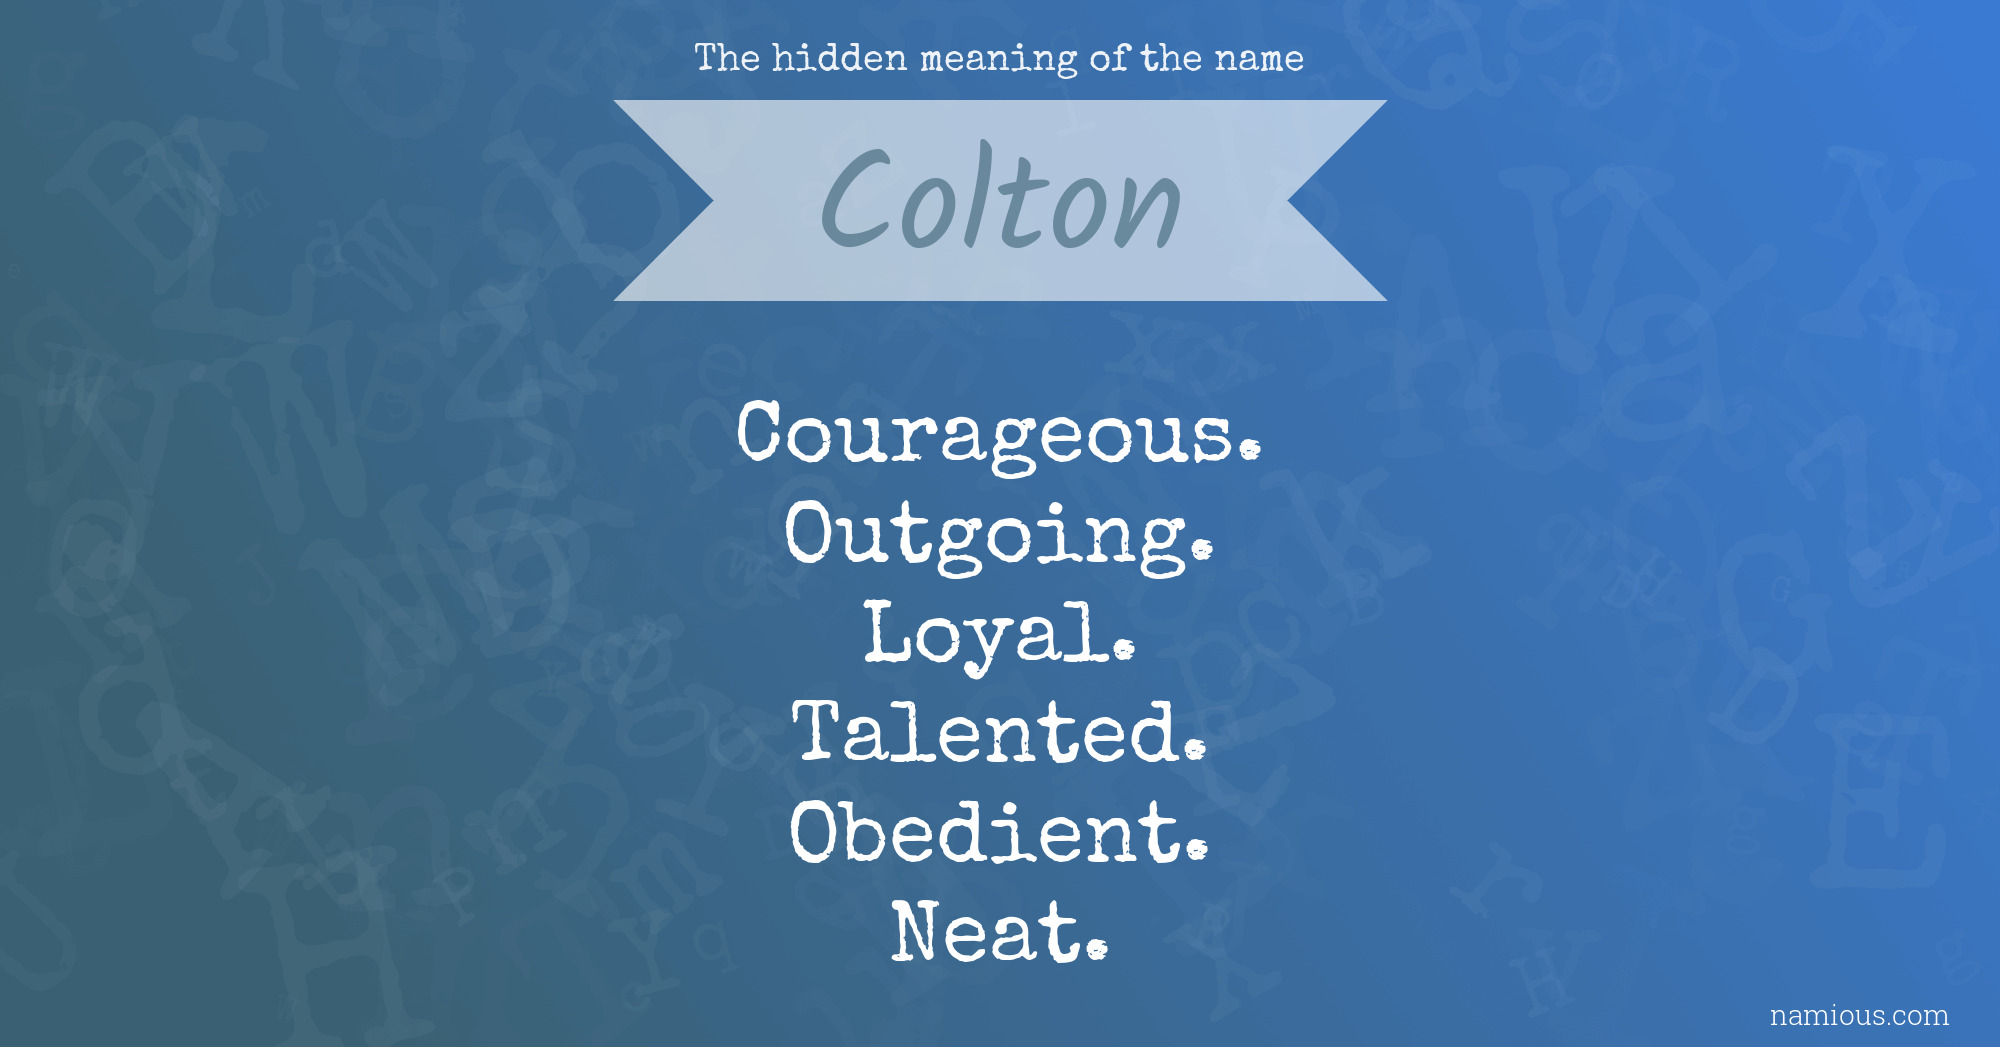 The hidden meaning of the name Colton